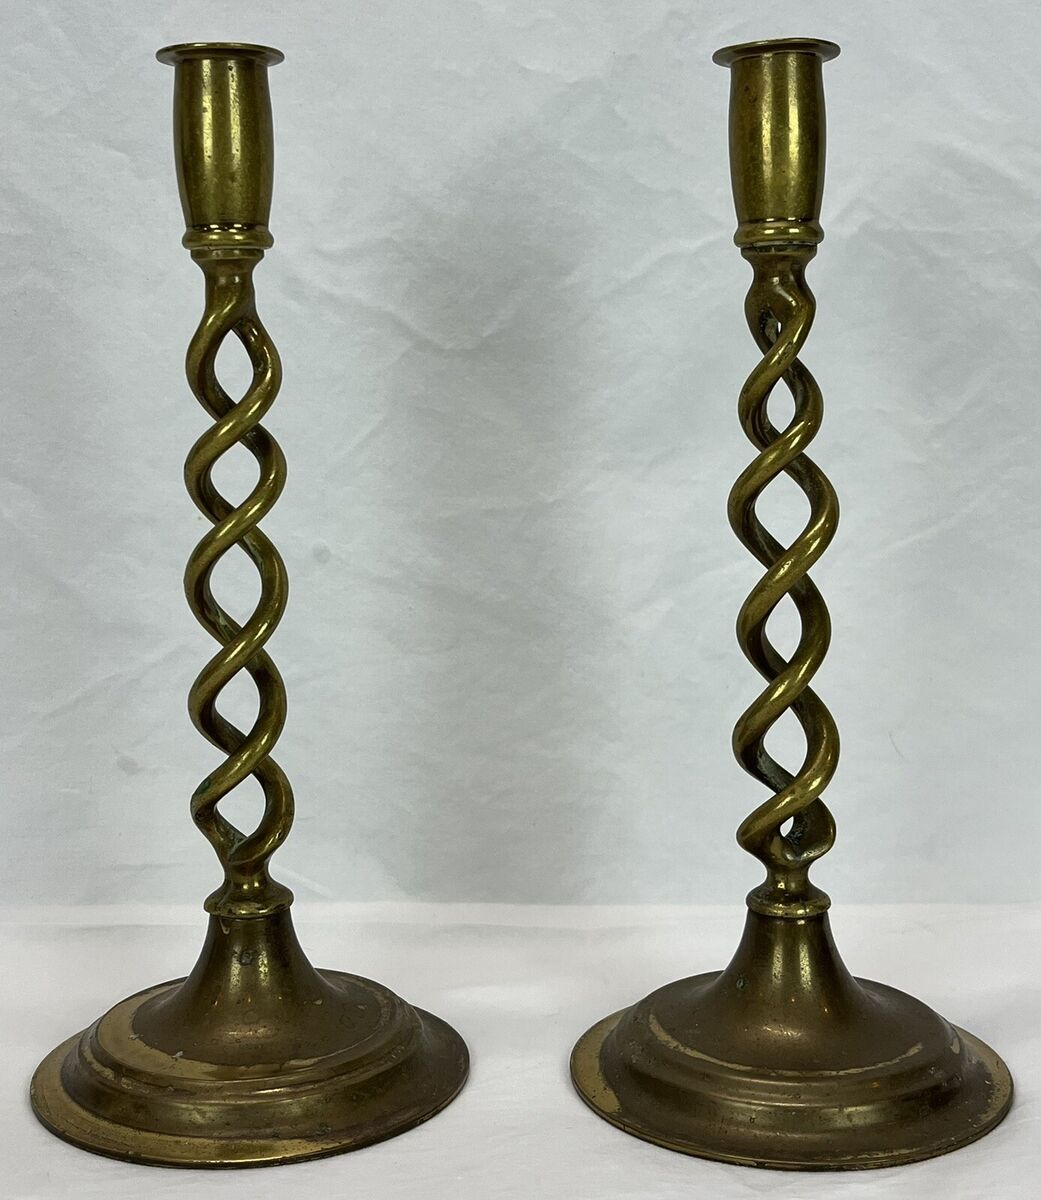 Pair Antique Brass Open Barley Twist Candlesticks Candle Holders